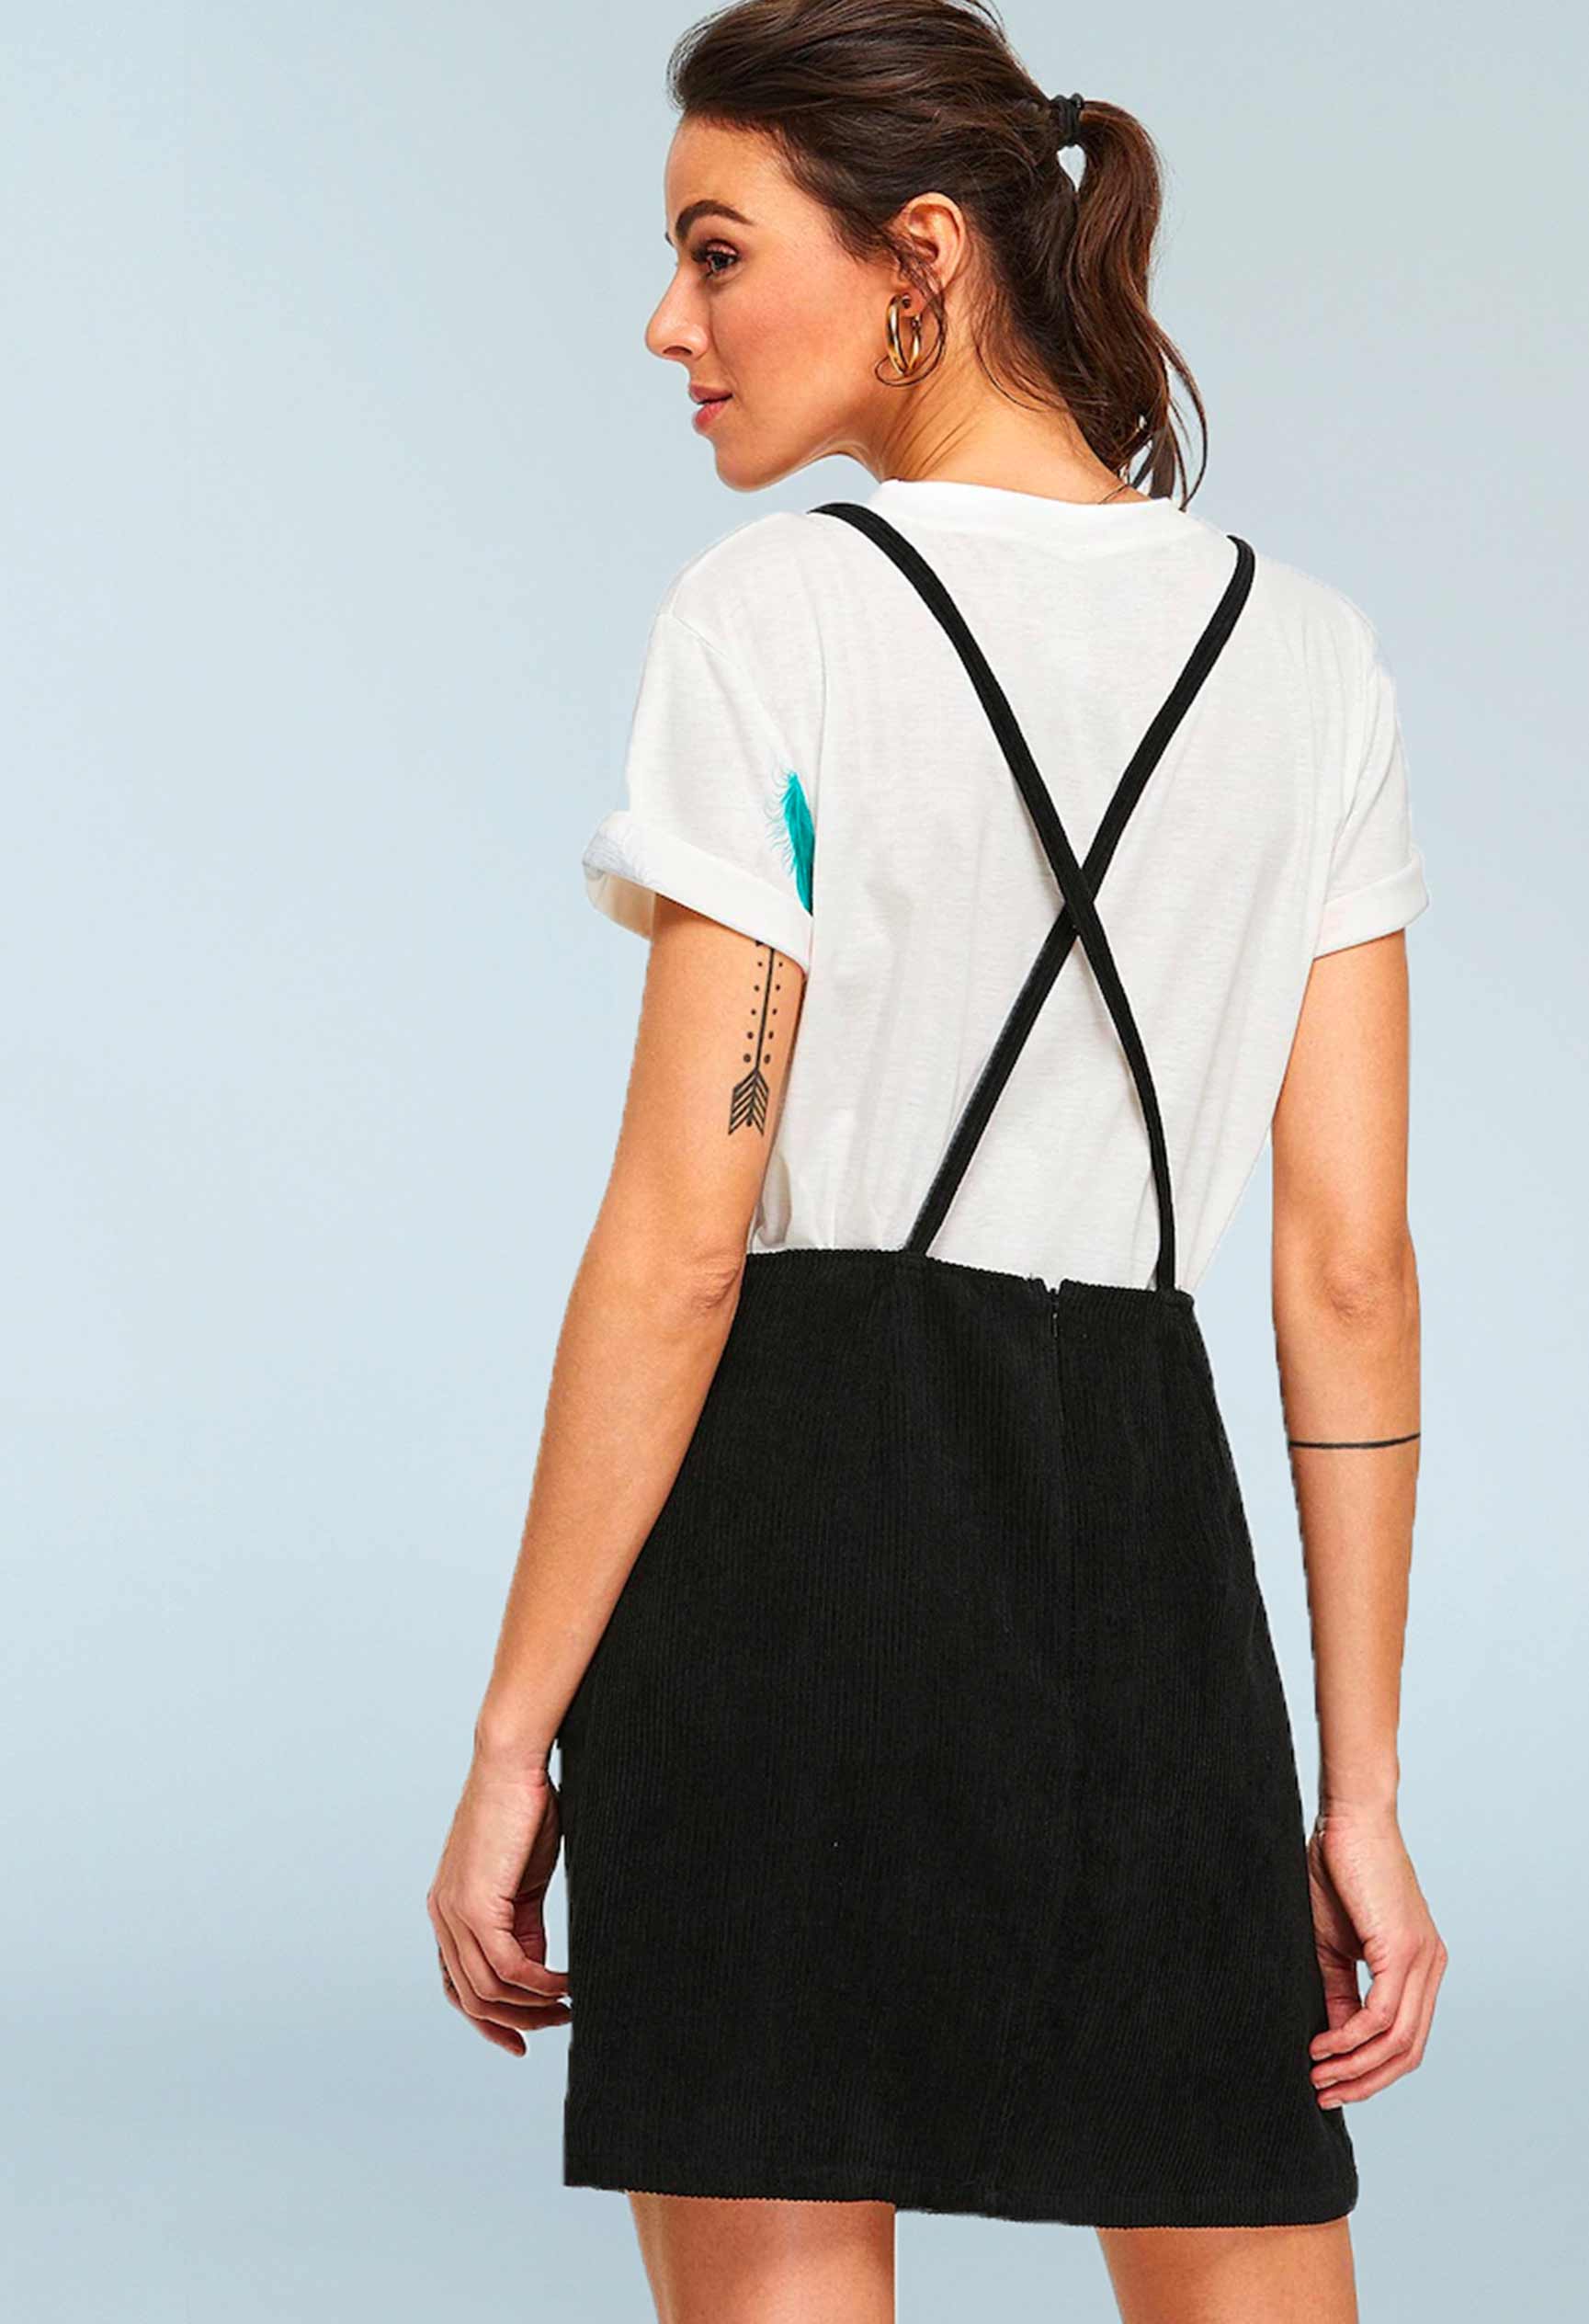 Our Lady of Leisure Rickey Pinafore Dress